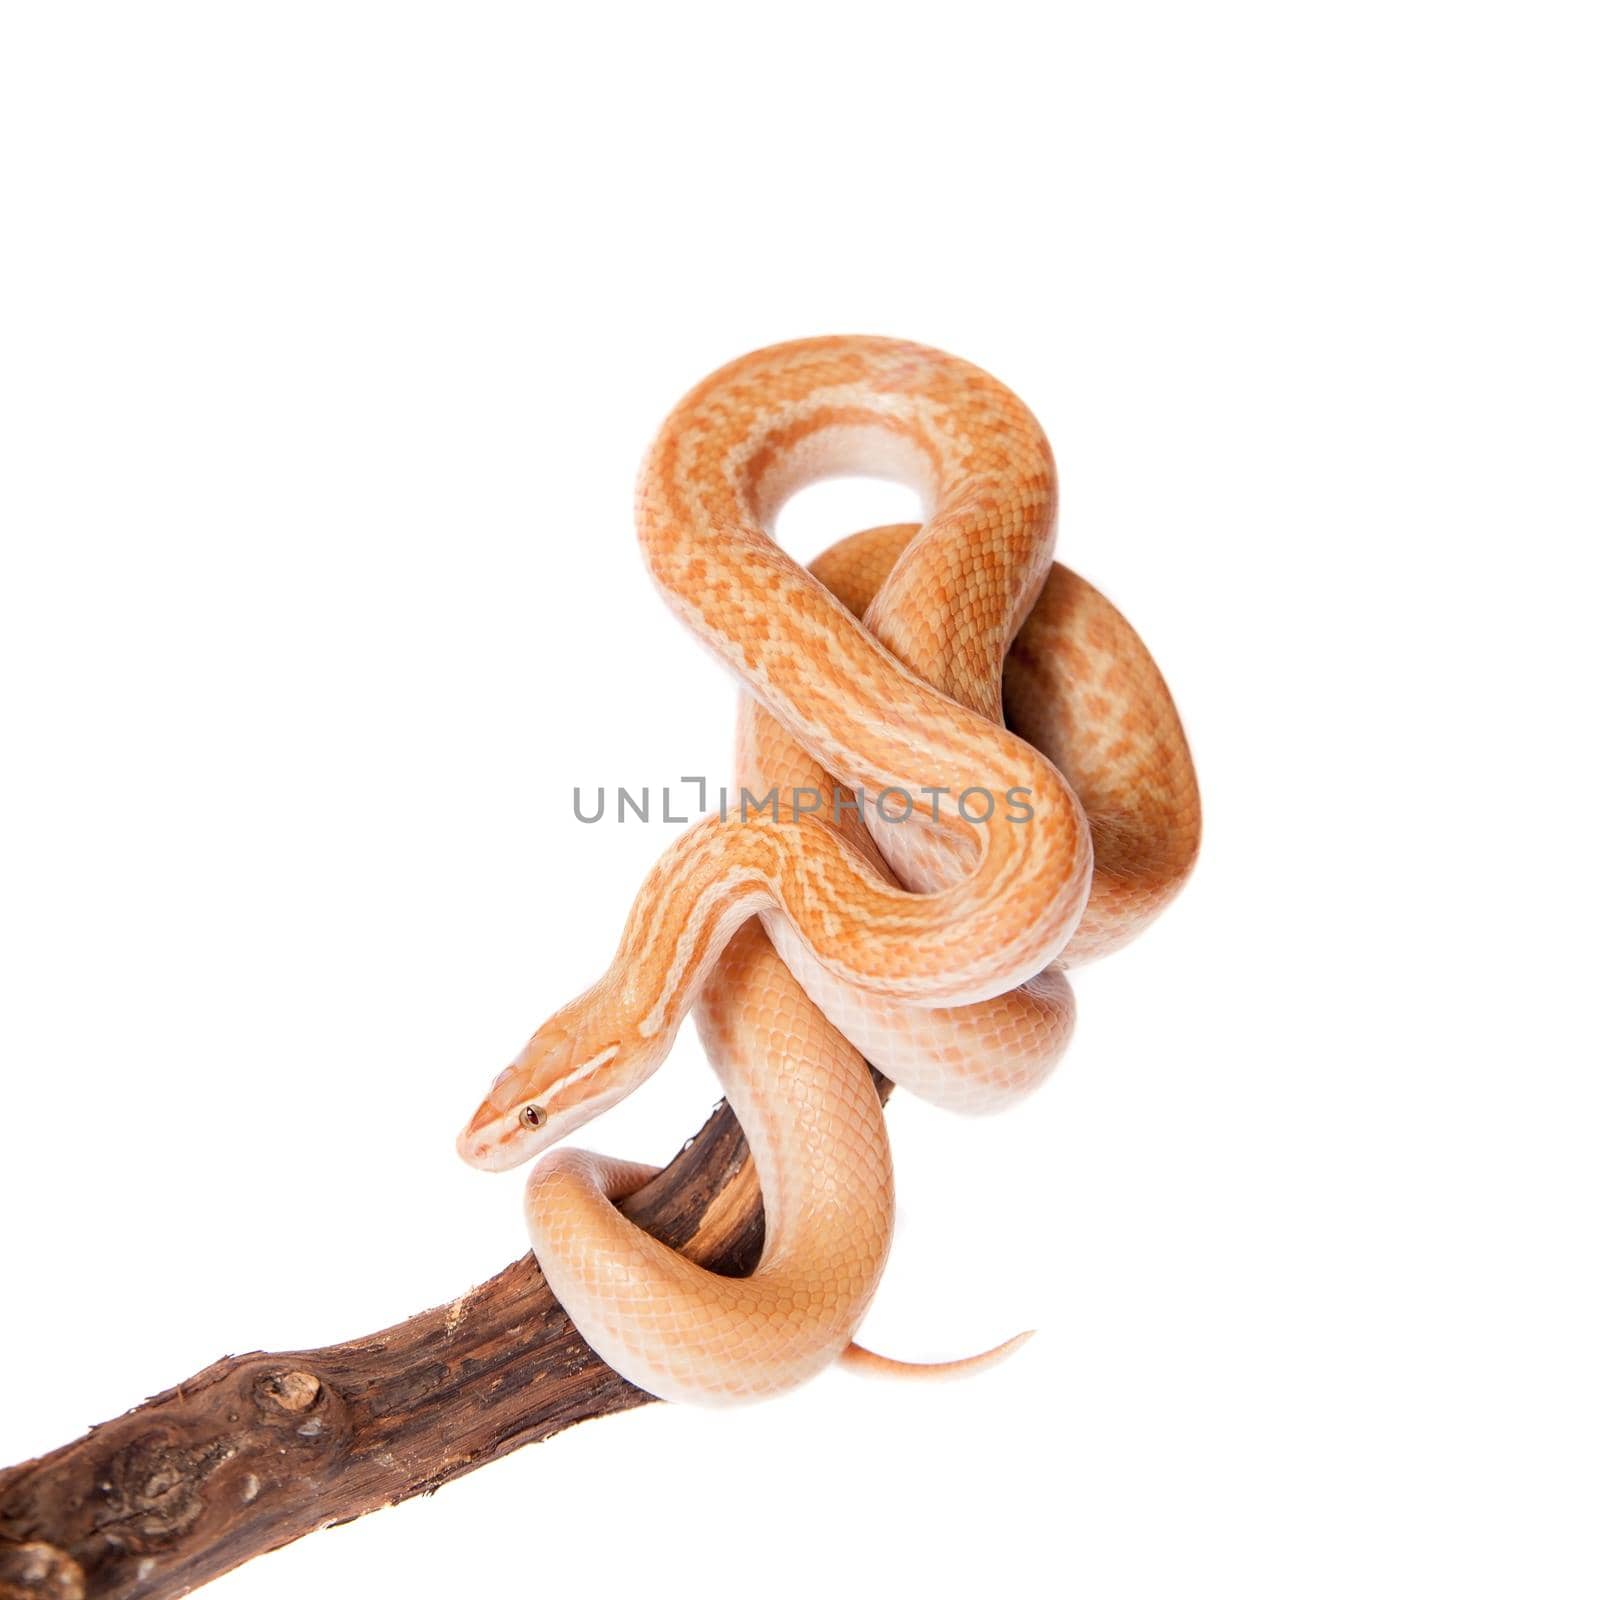 Coiled Cape House Snake, Boaedon Capensis, on white background